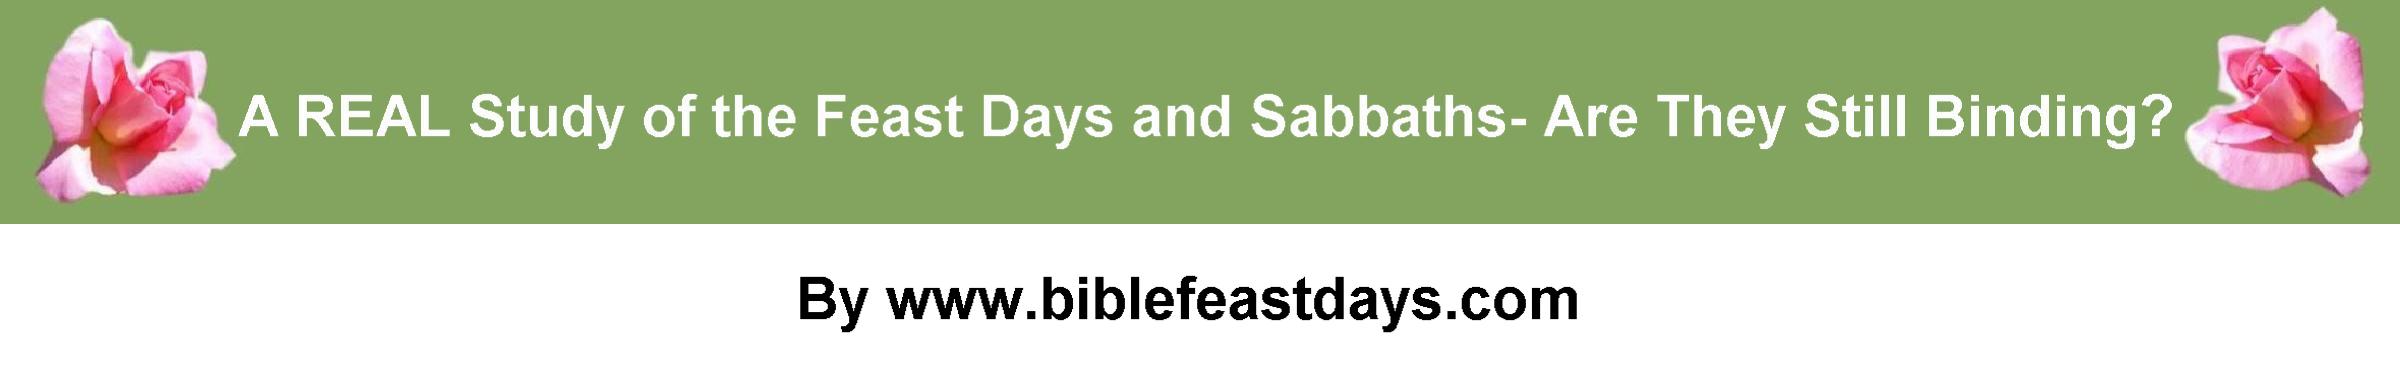 A REAL Study of the Feast Days and Sabbaths- Are They Still Binding?